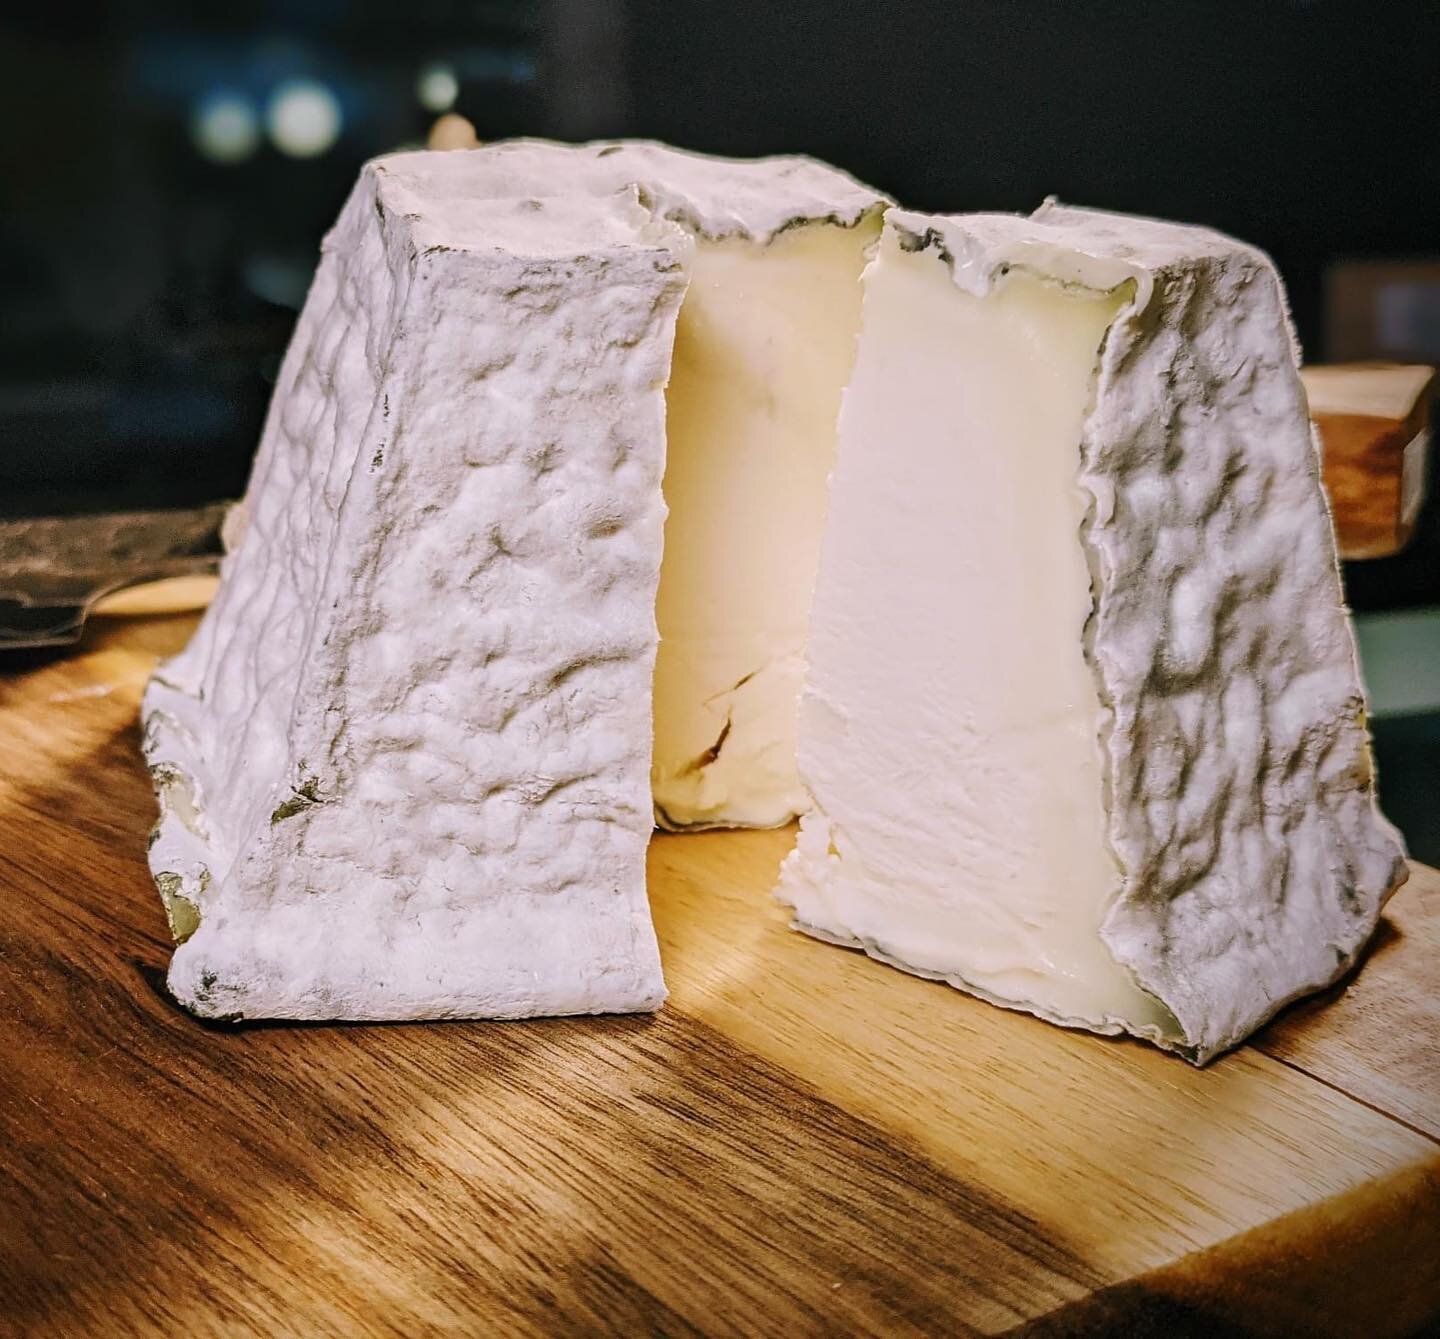 Legend says the &quot;topless&quot; pyramid shape of Pyramide de Chabris originated from Napoleon cutting the tip off with his sword after returning from a failed campaign in Egypt. 🗡️ Ever since, the cheese has been made in this shape.

This creamy